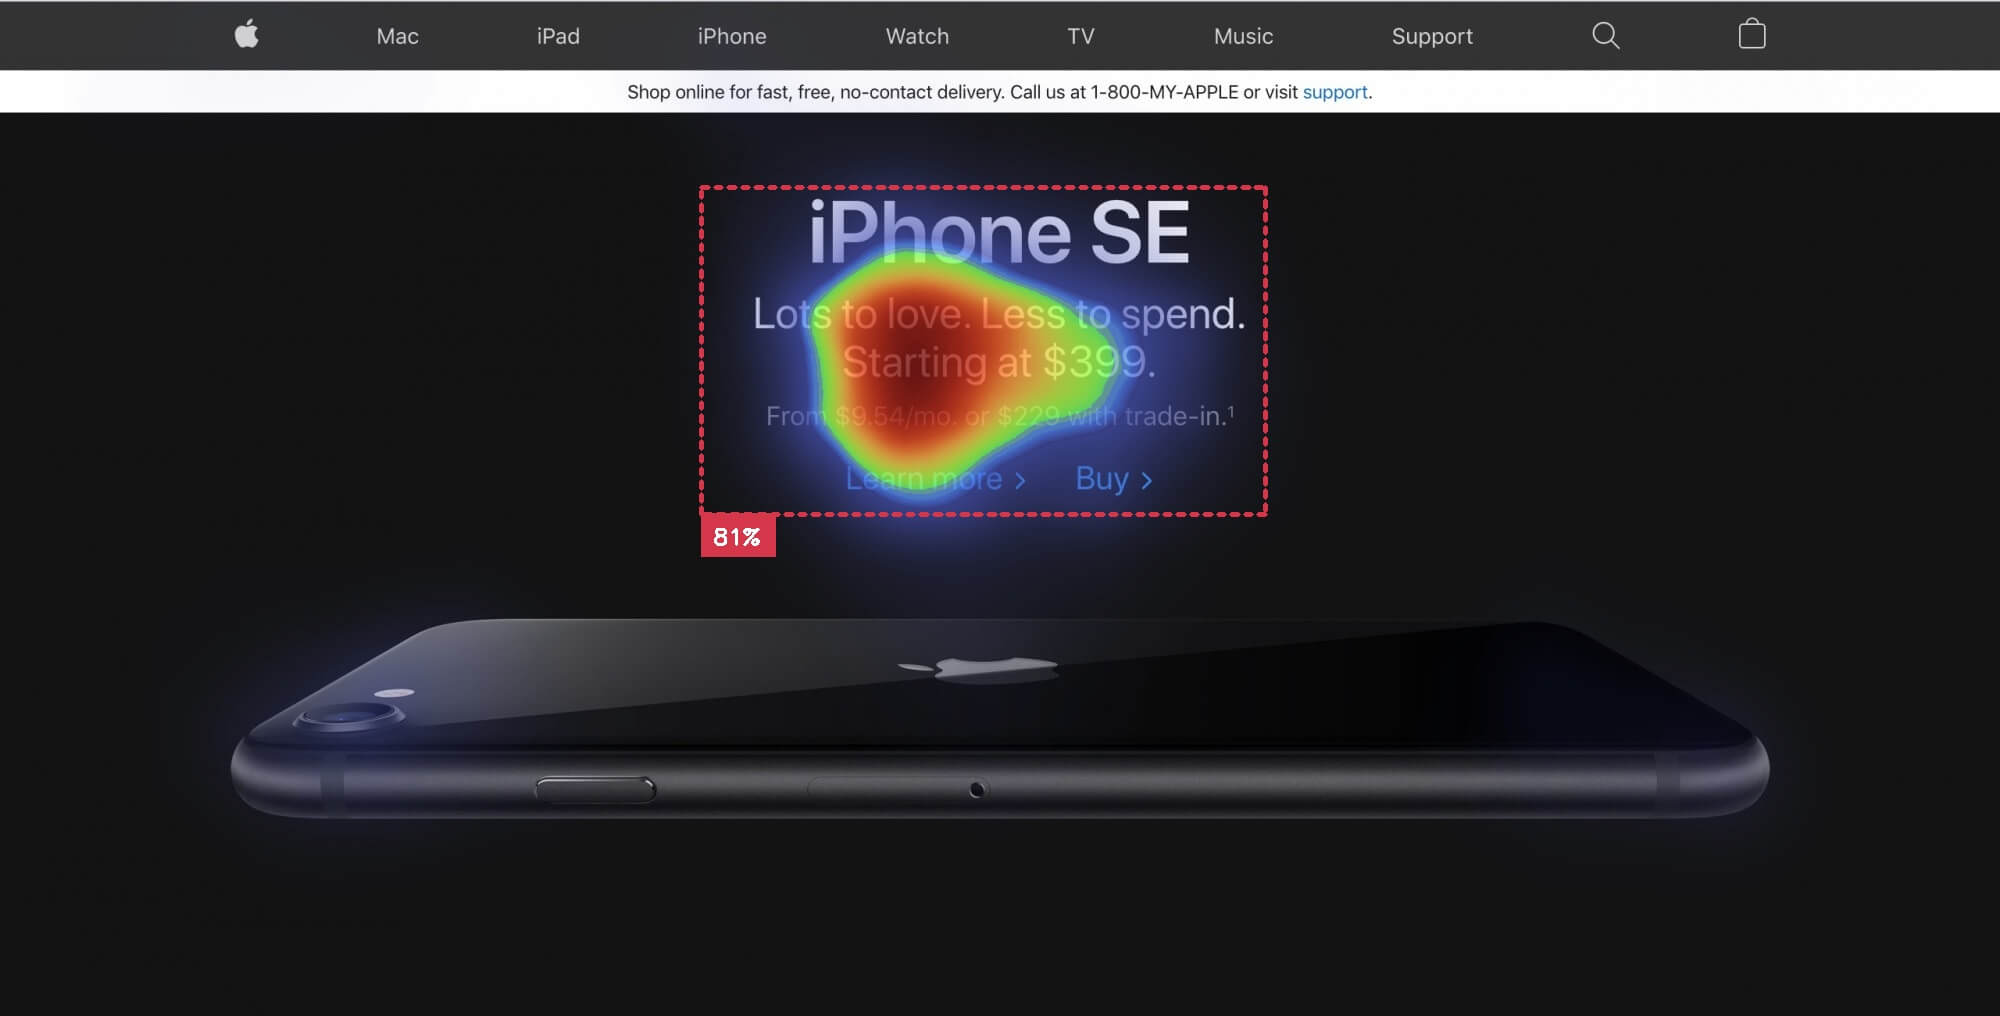 apple landing page use for grid layout example with heatmap overlay